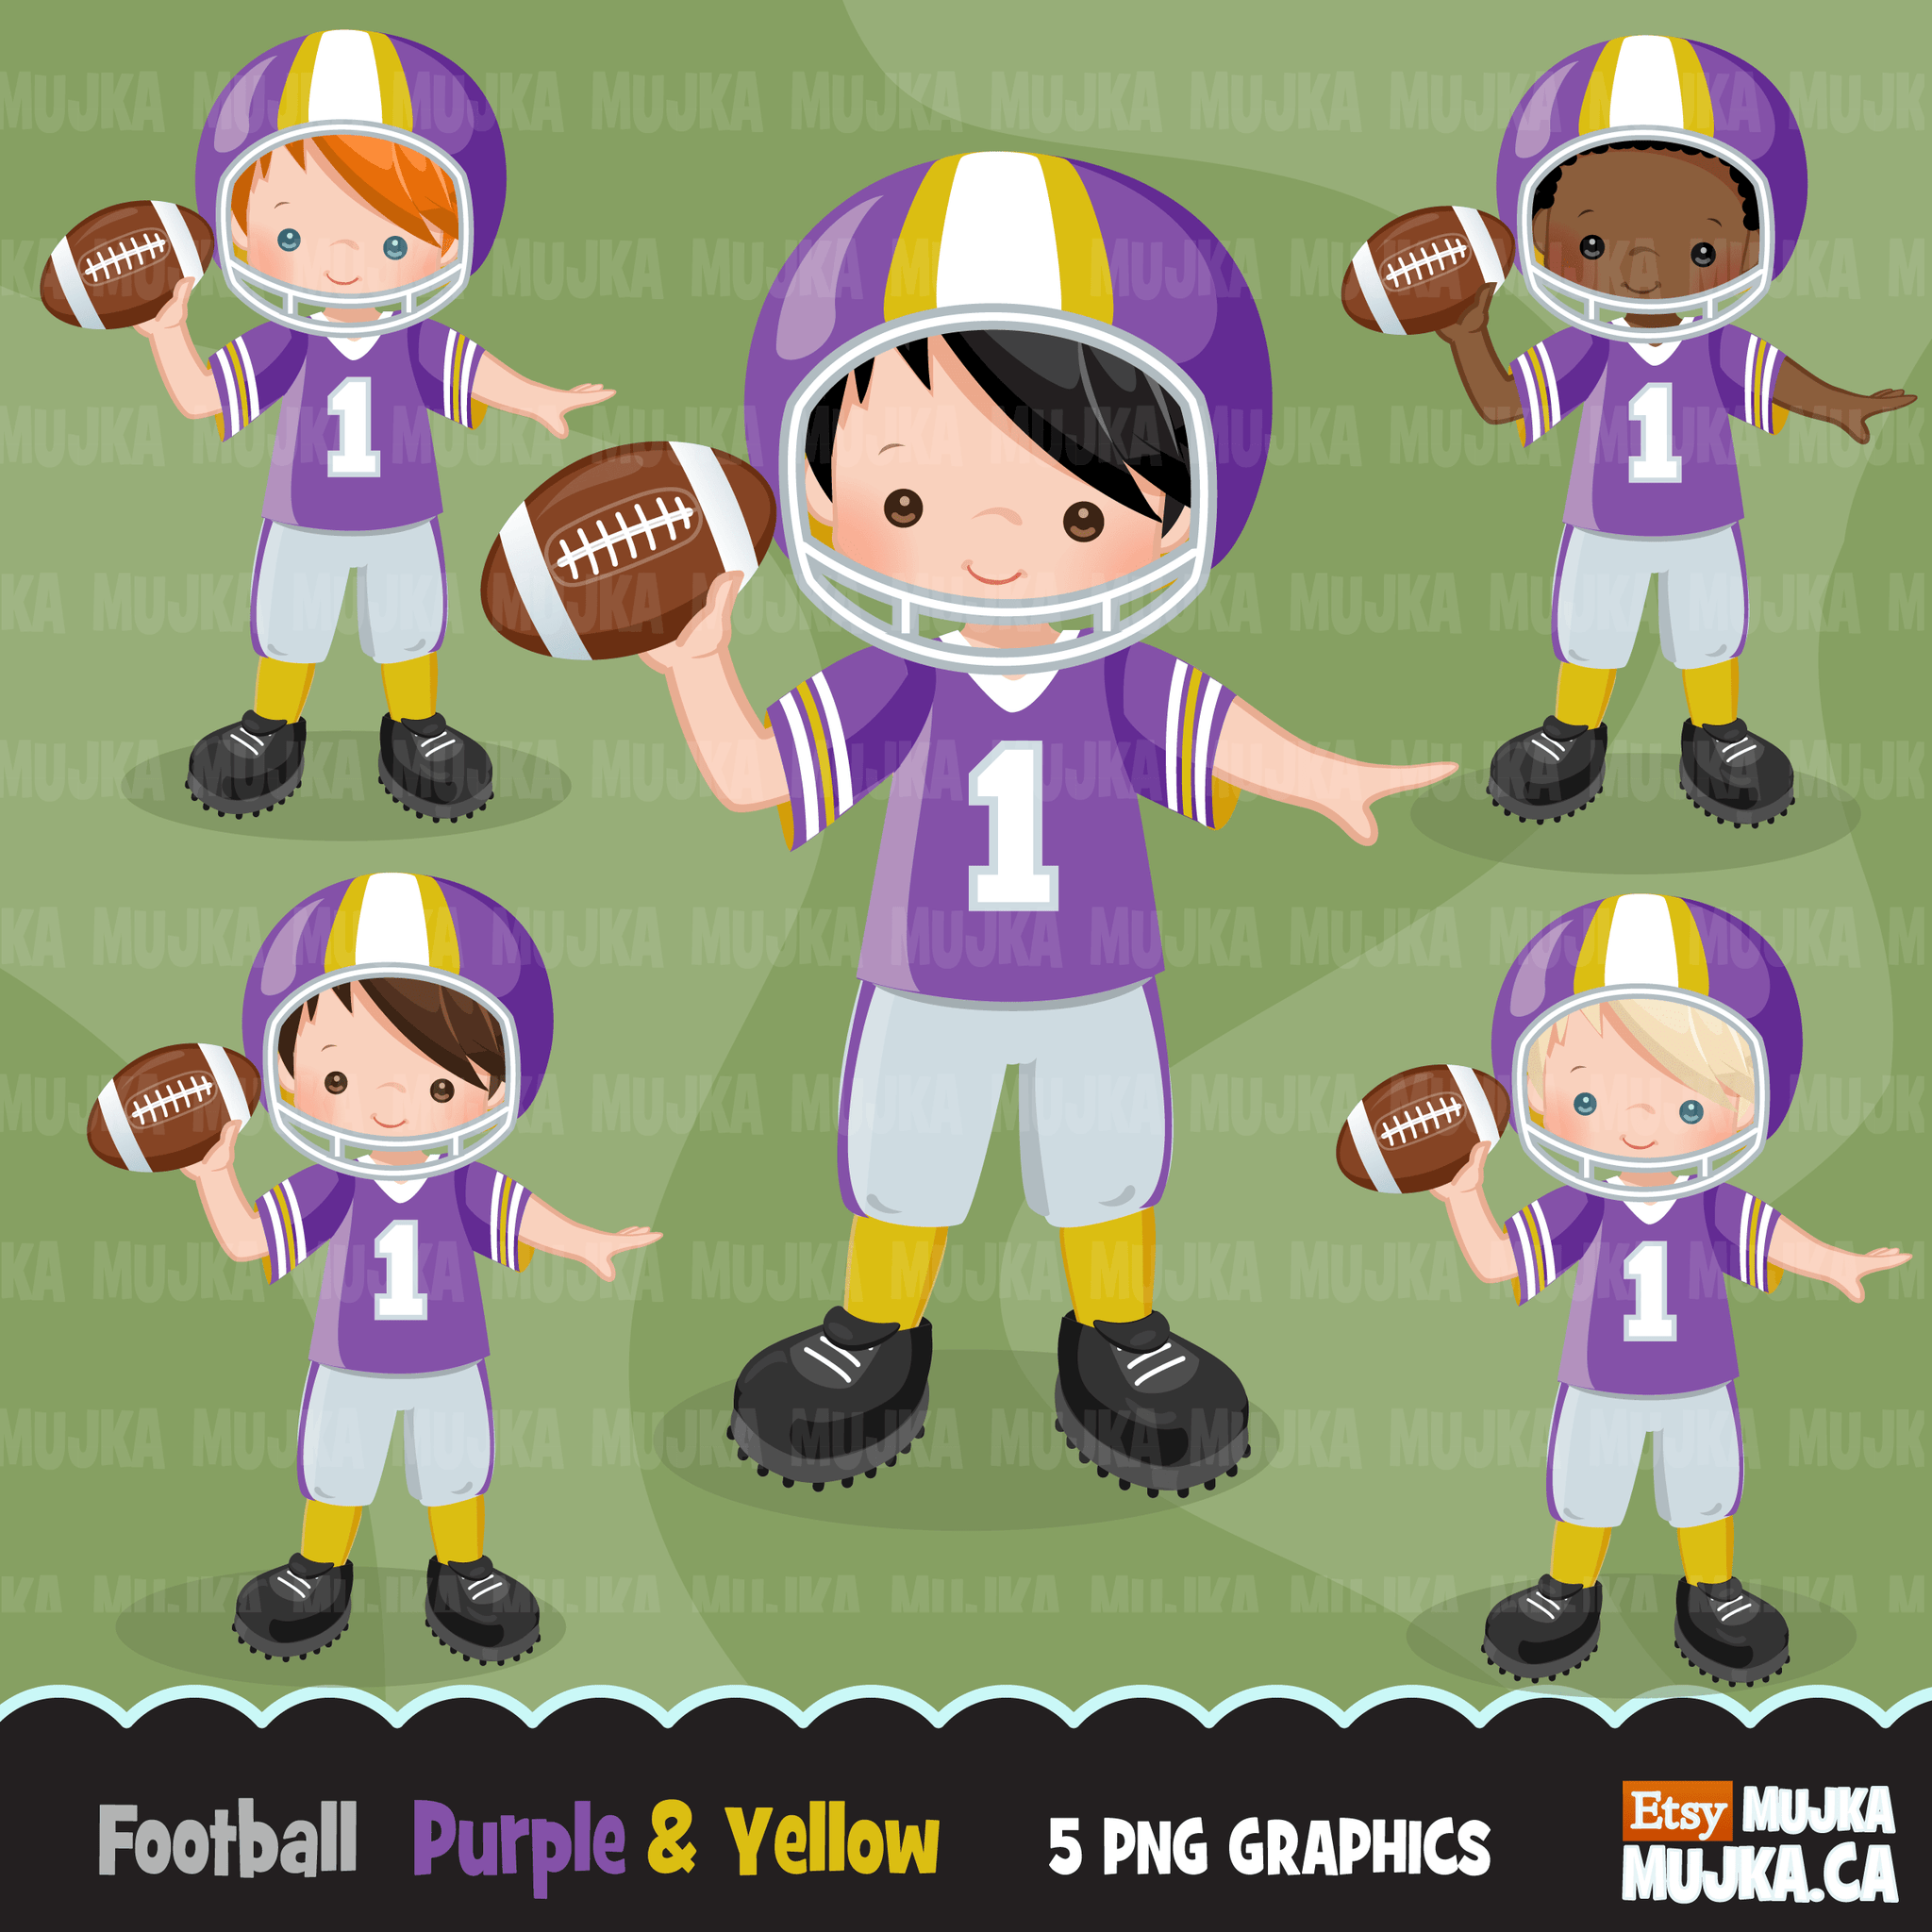 American Football Clipart Bundle, Sports Graphics, Cute Football player Boy characters.